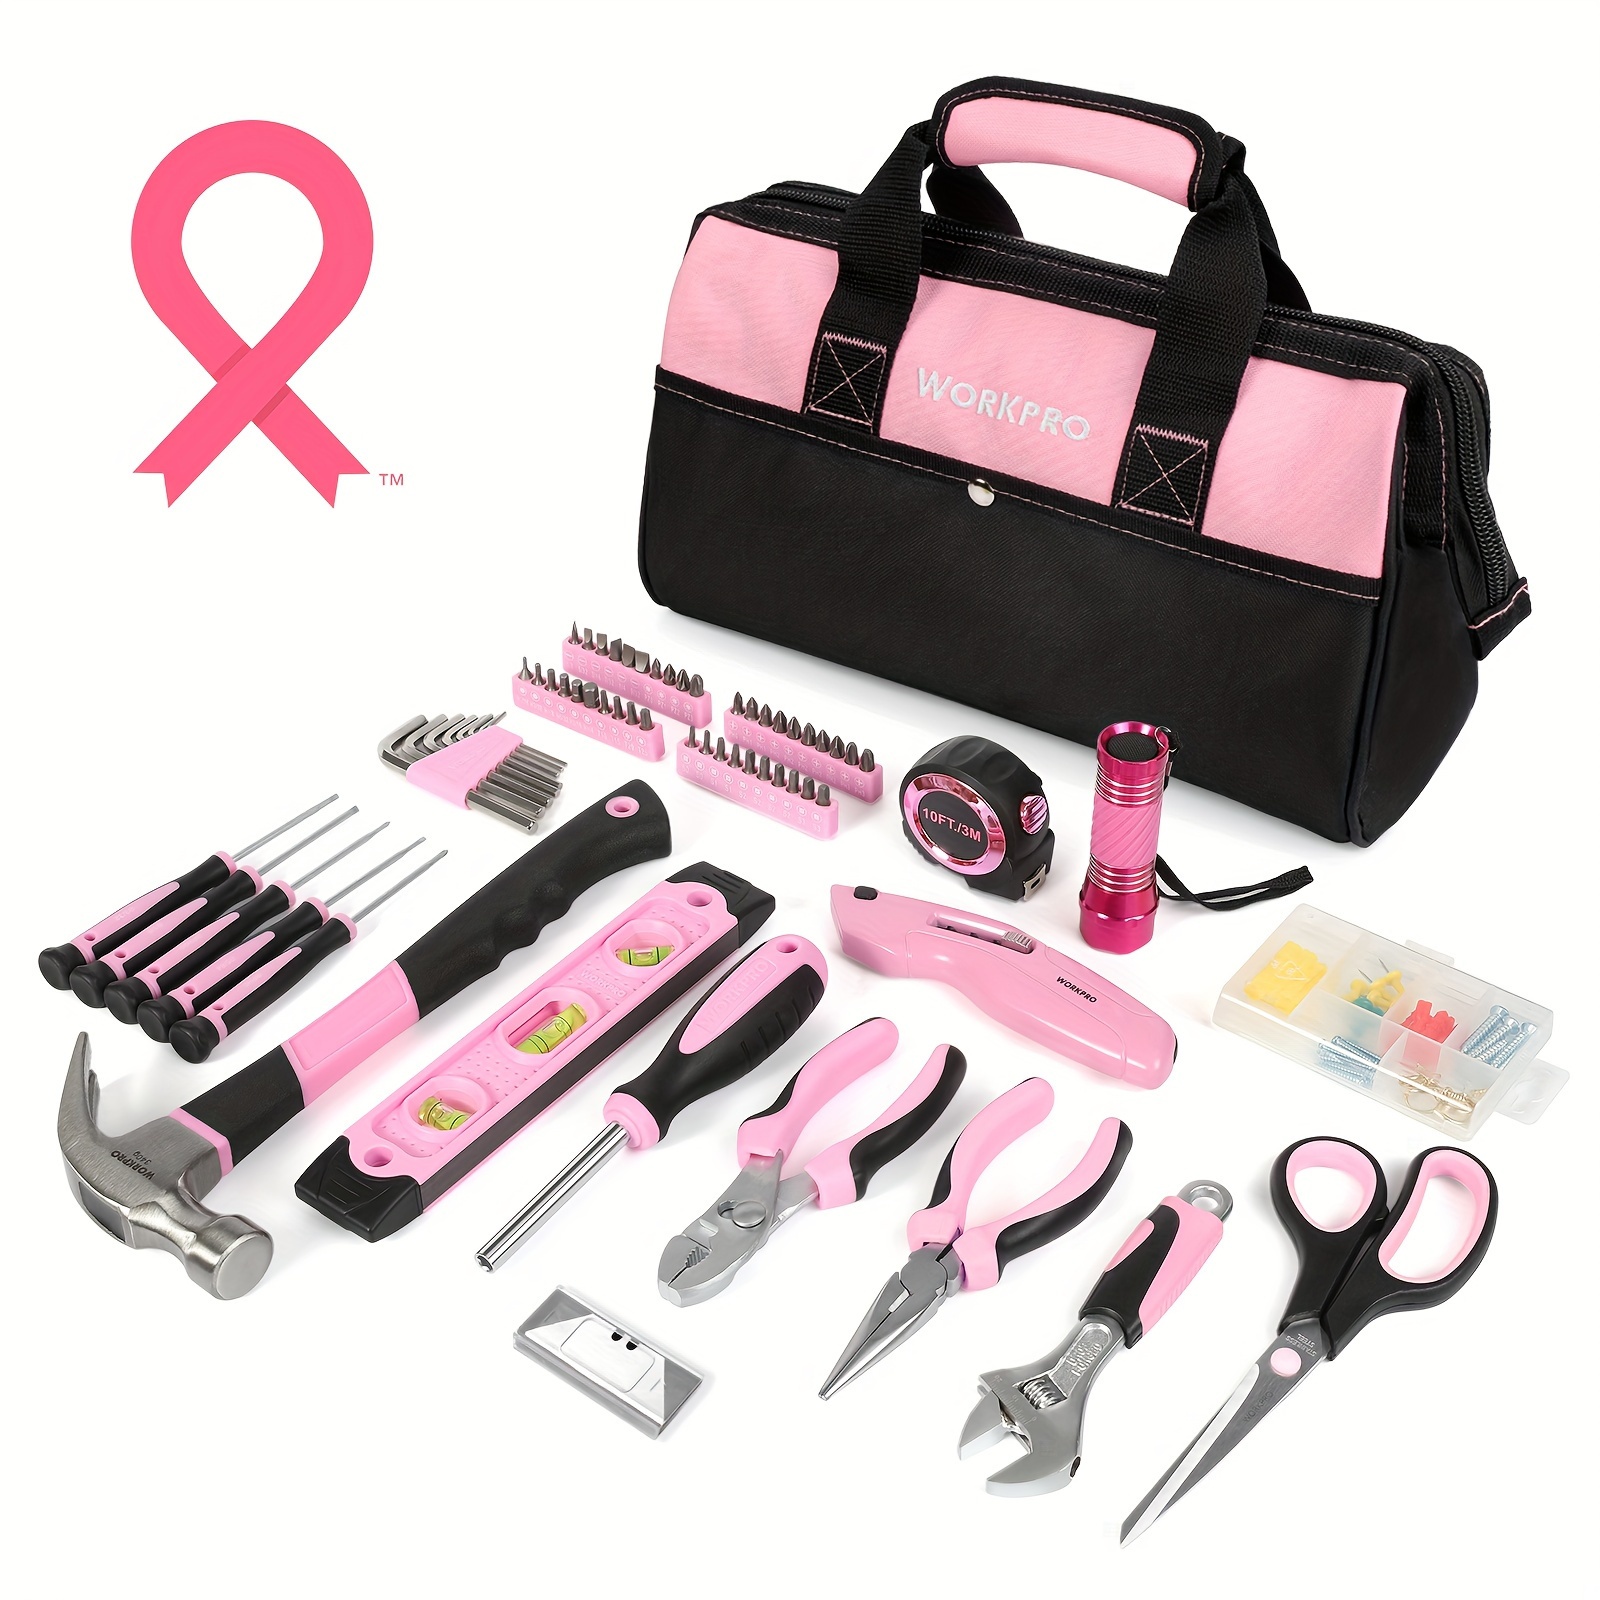 

Workpro Pink Tool Kit, 263-piece Home Repairing Tool Set With Wide Mouth Open Storage Bag, Household Tool Kit -